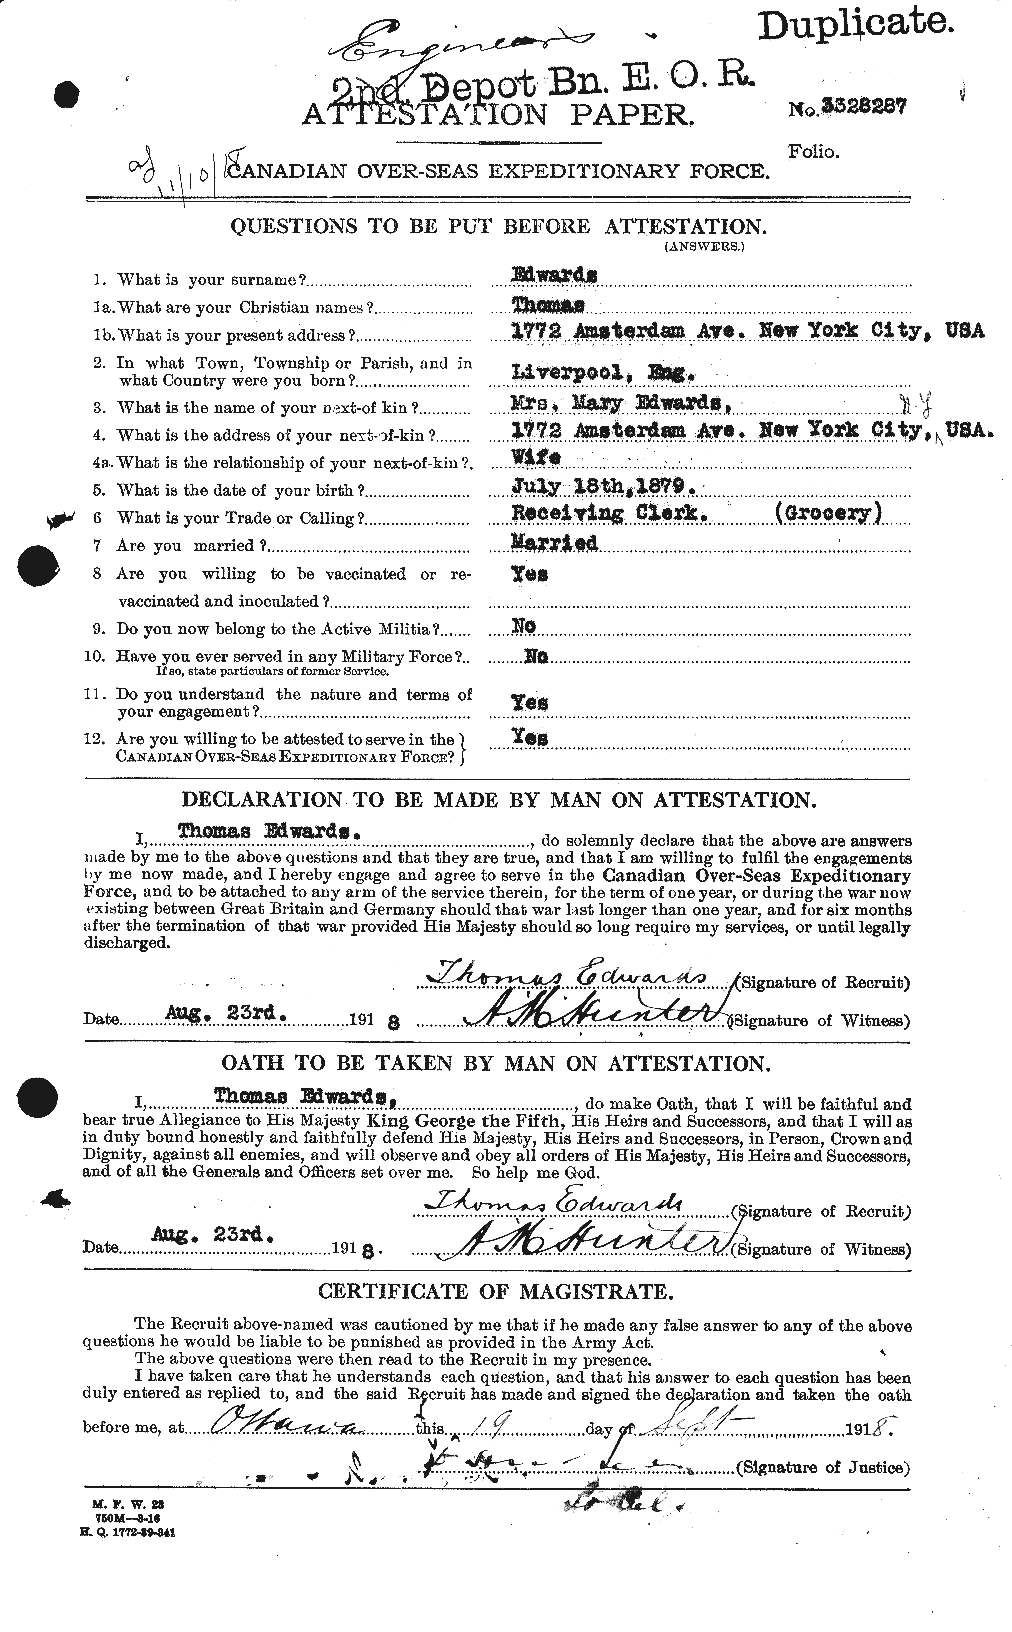 Personnel Records of the First World War - CEF 310337a